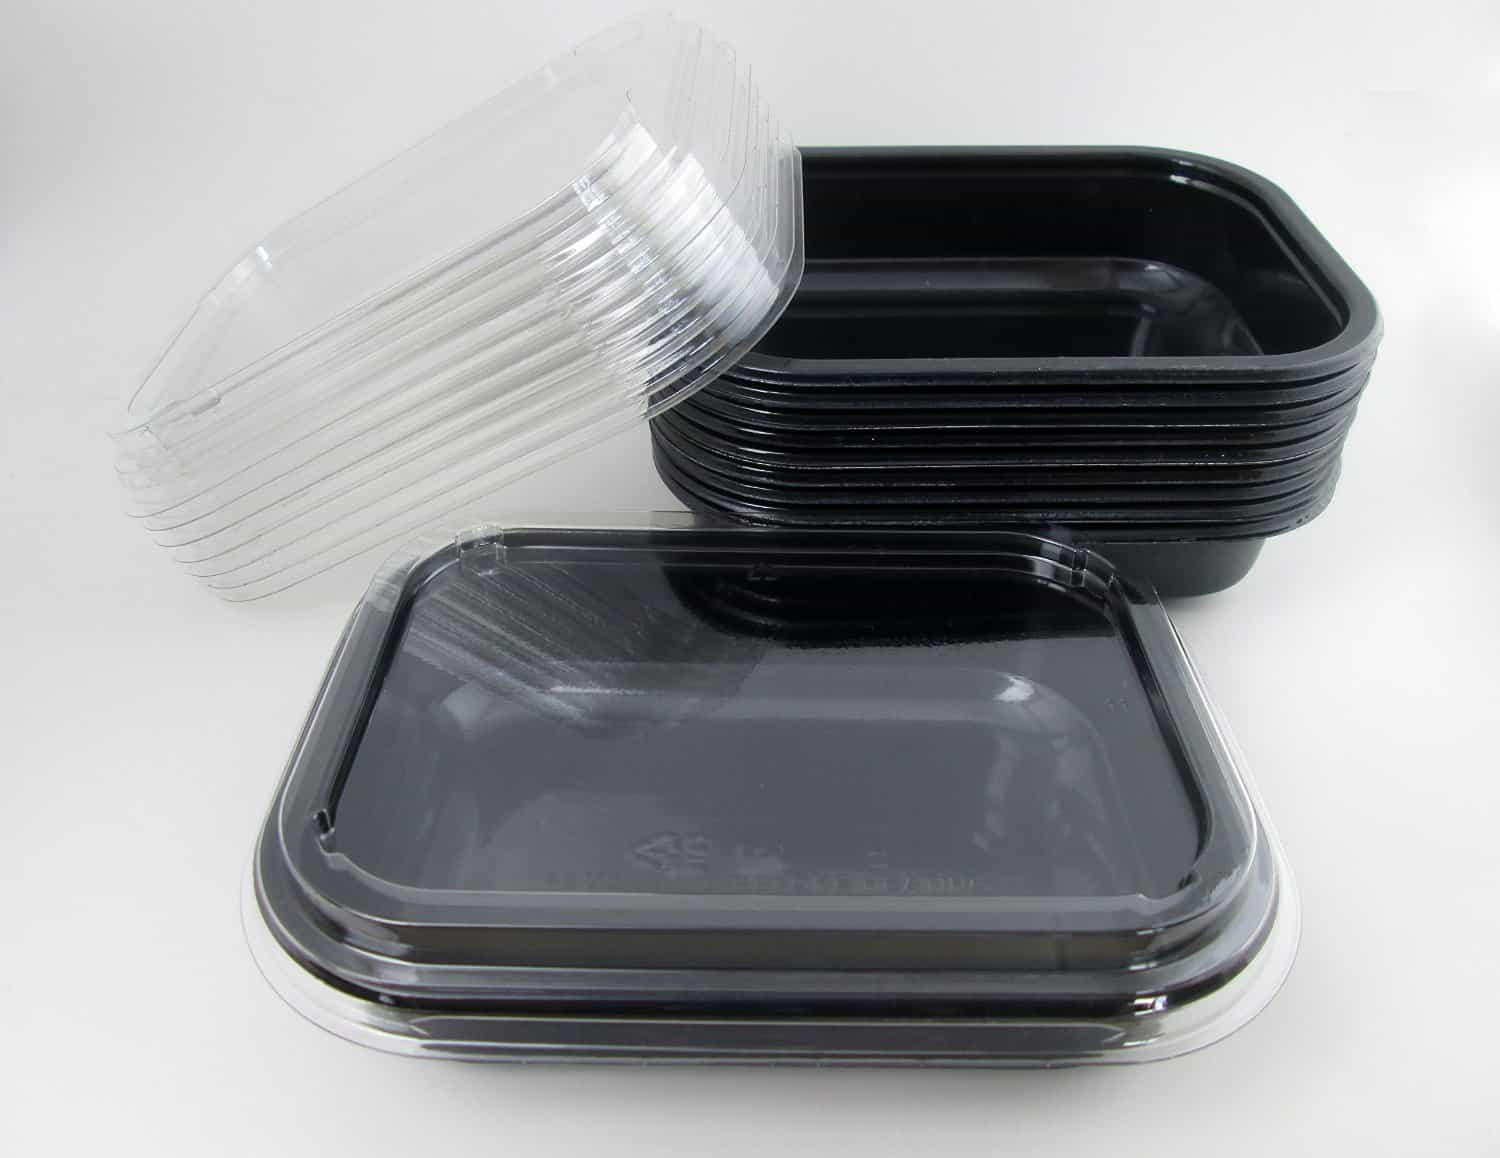 Meal Prep Freezer Meal Containers Review